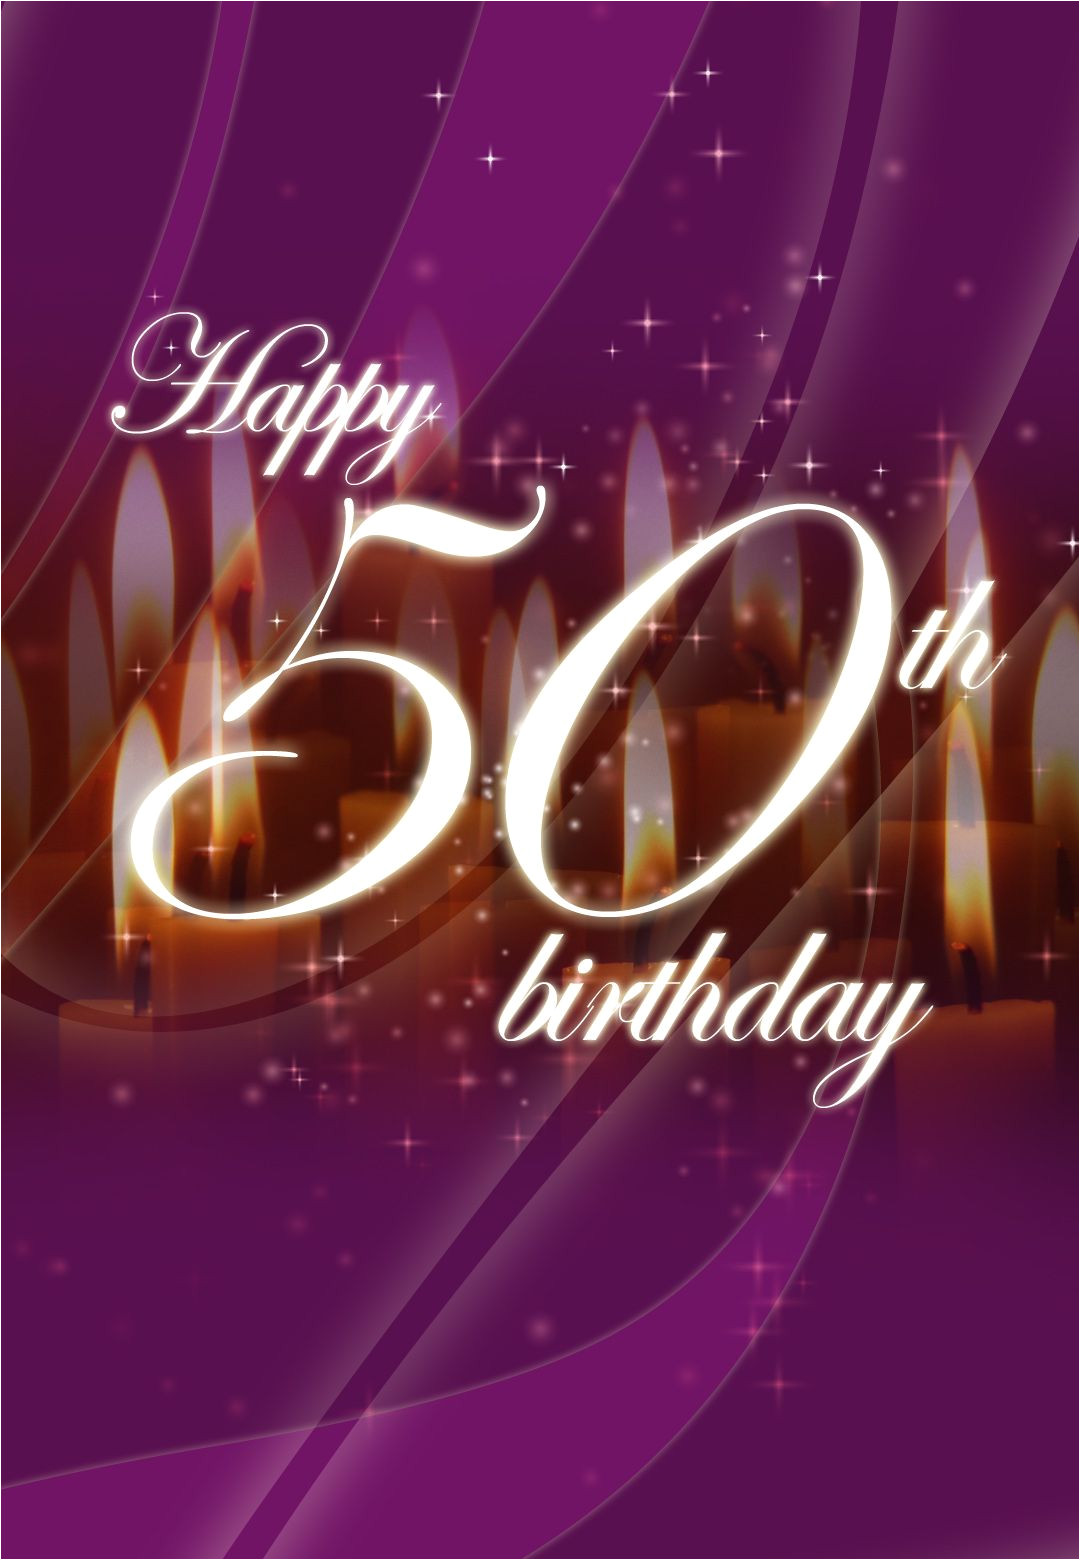 Card Messages for 50th Birthday Free Printable Happy 50th Birthday Greeting Card Happy